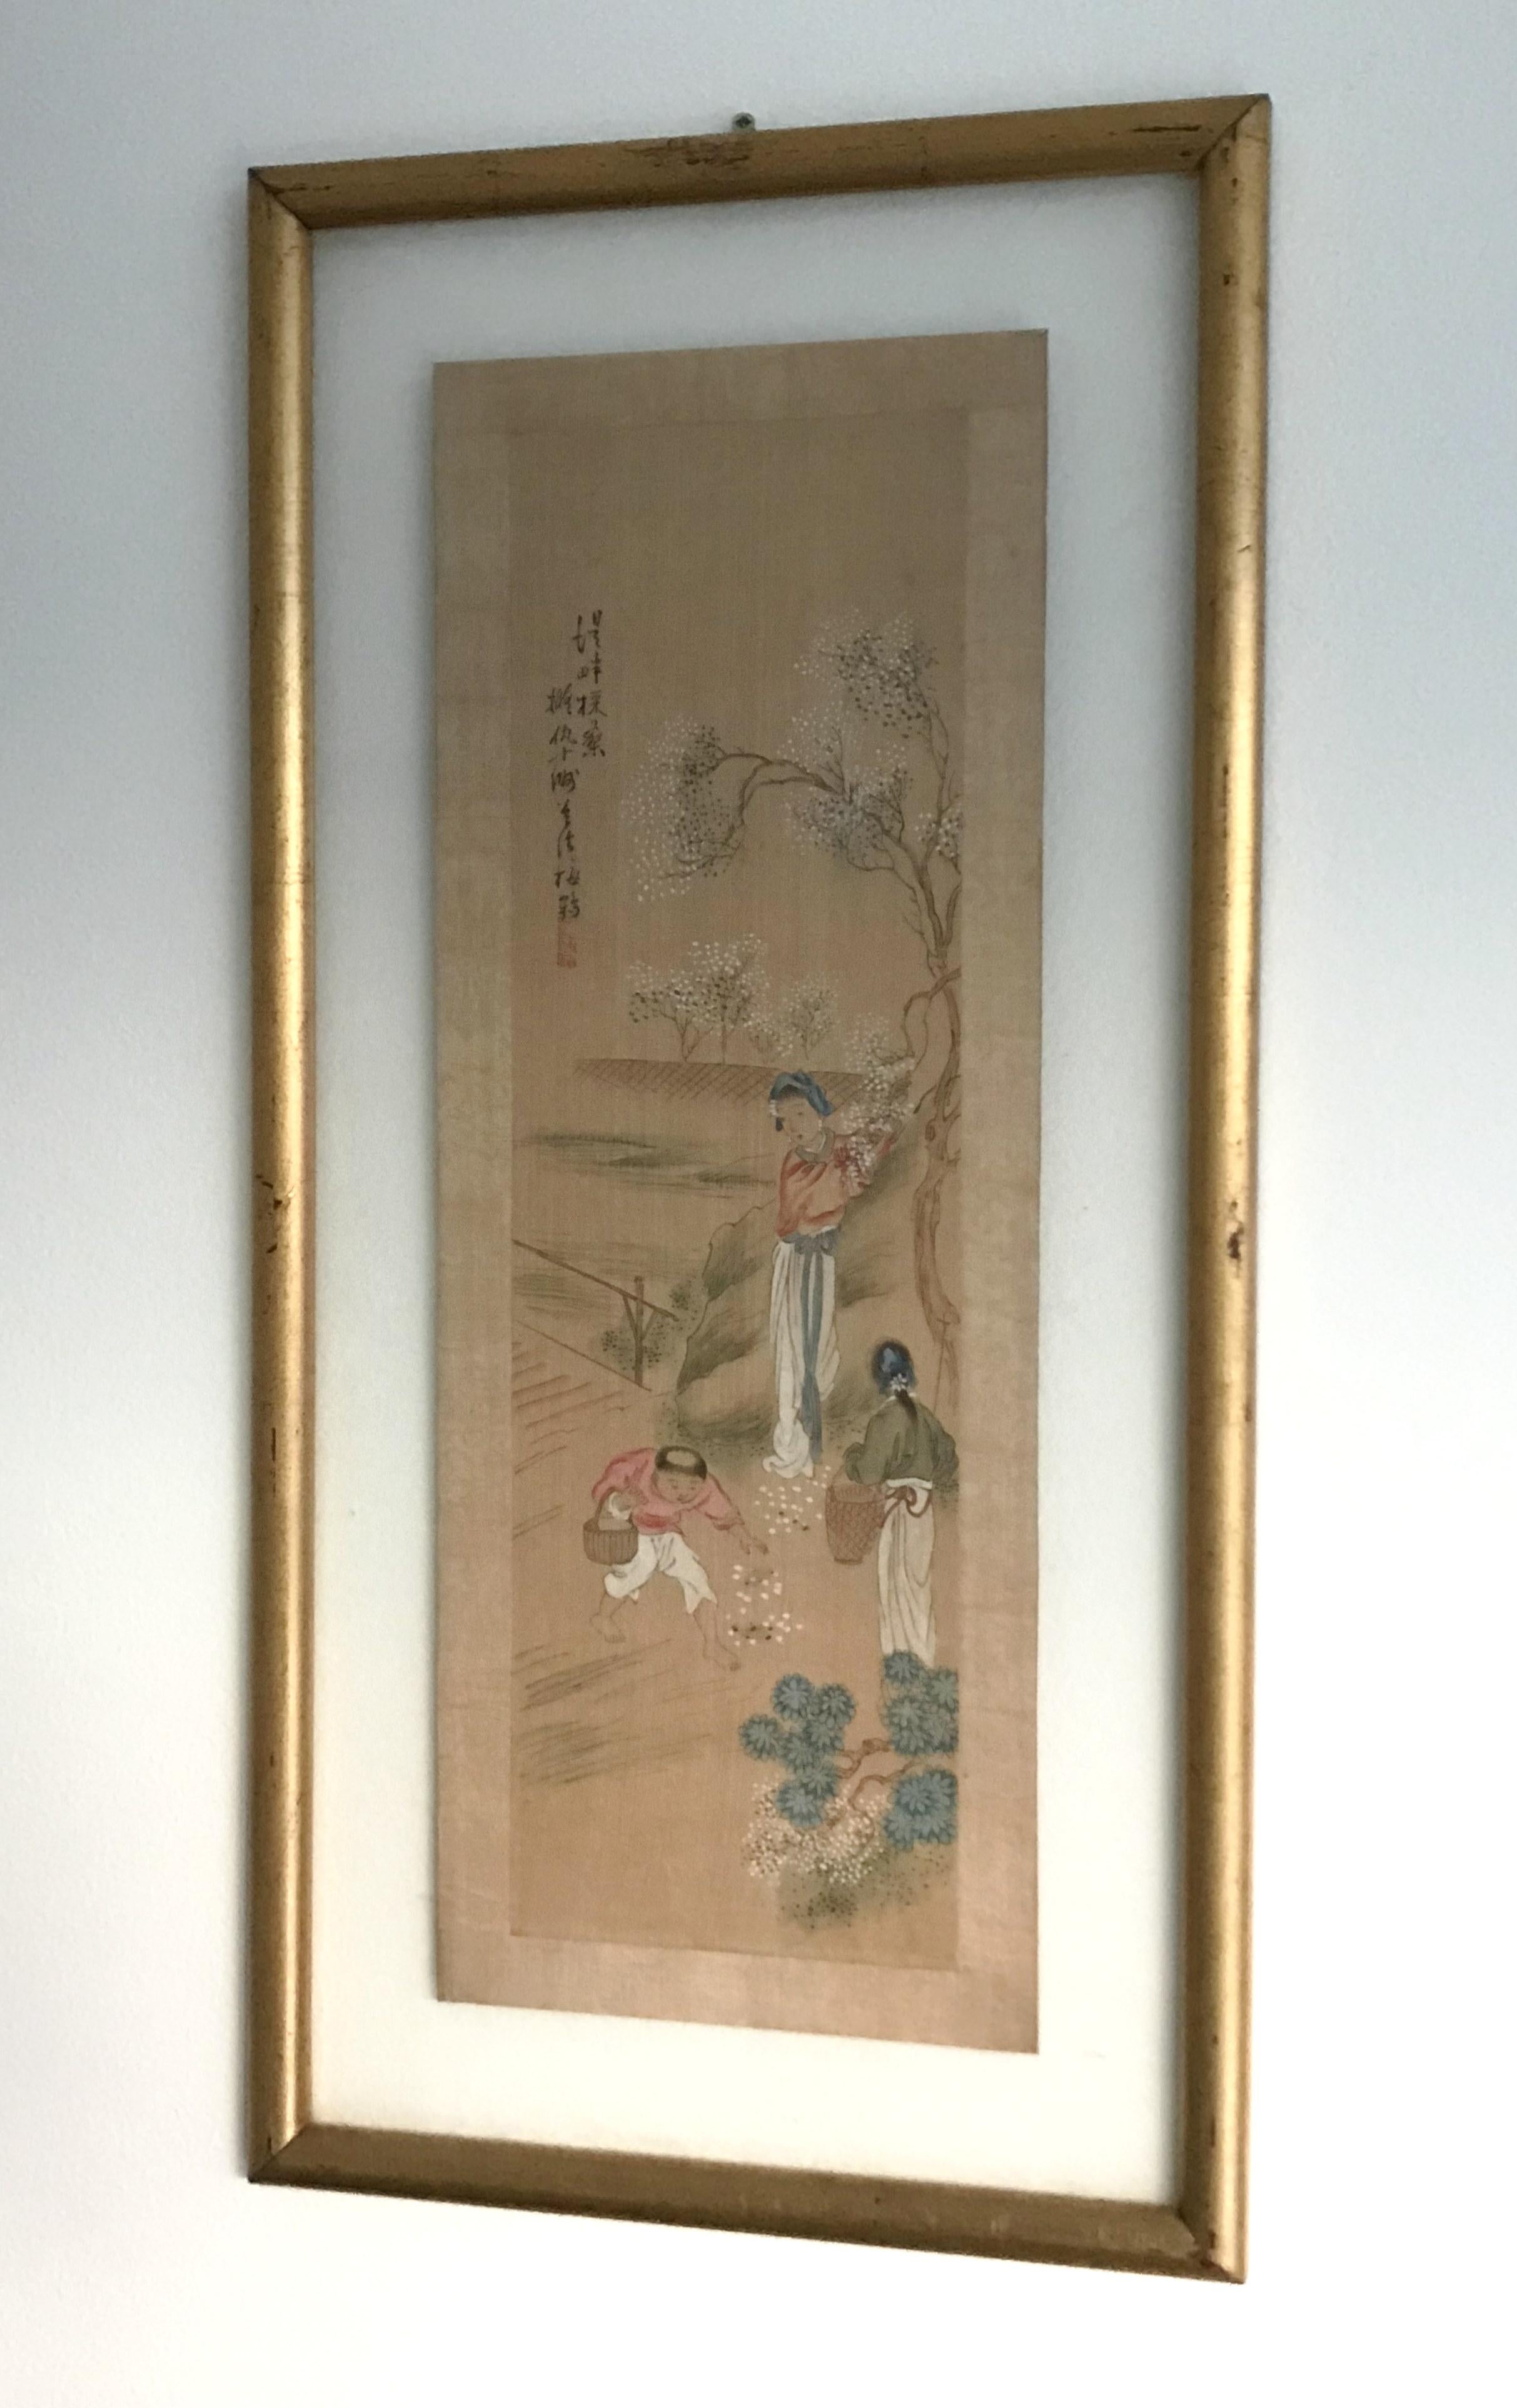 Antique Chinese watercolor painting on paper, enclosed in glass and gilt wood frame, early 20th century
Measures: height 27.5 inches, width 13.5 inches, depth 0.75 inches
1 in stock in Palm Springs ON 50% OFF SALE for $375 !!!
Order reference #: